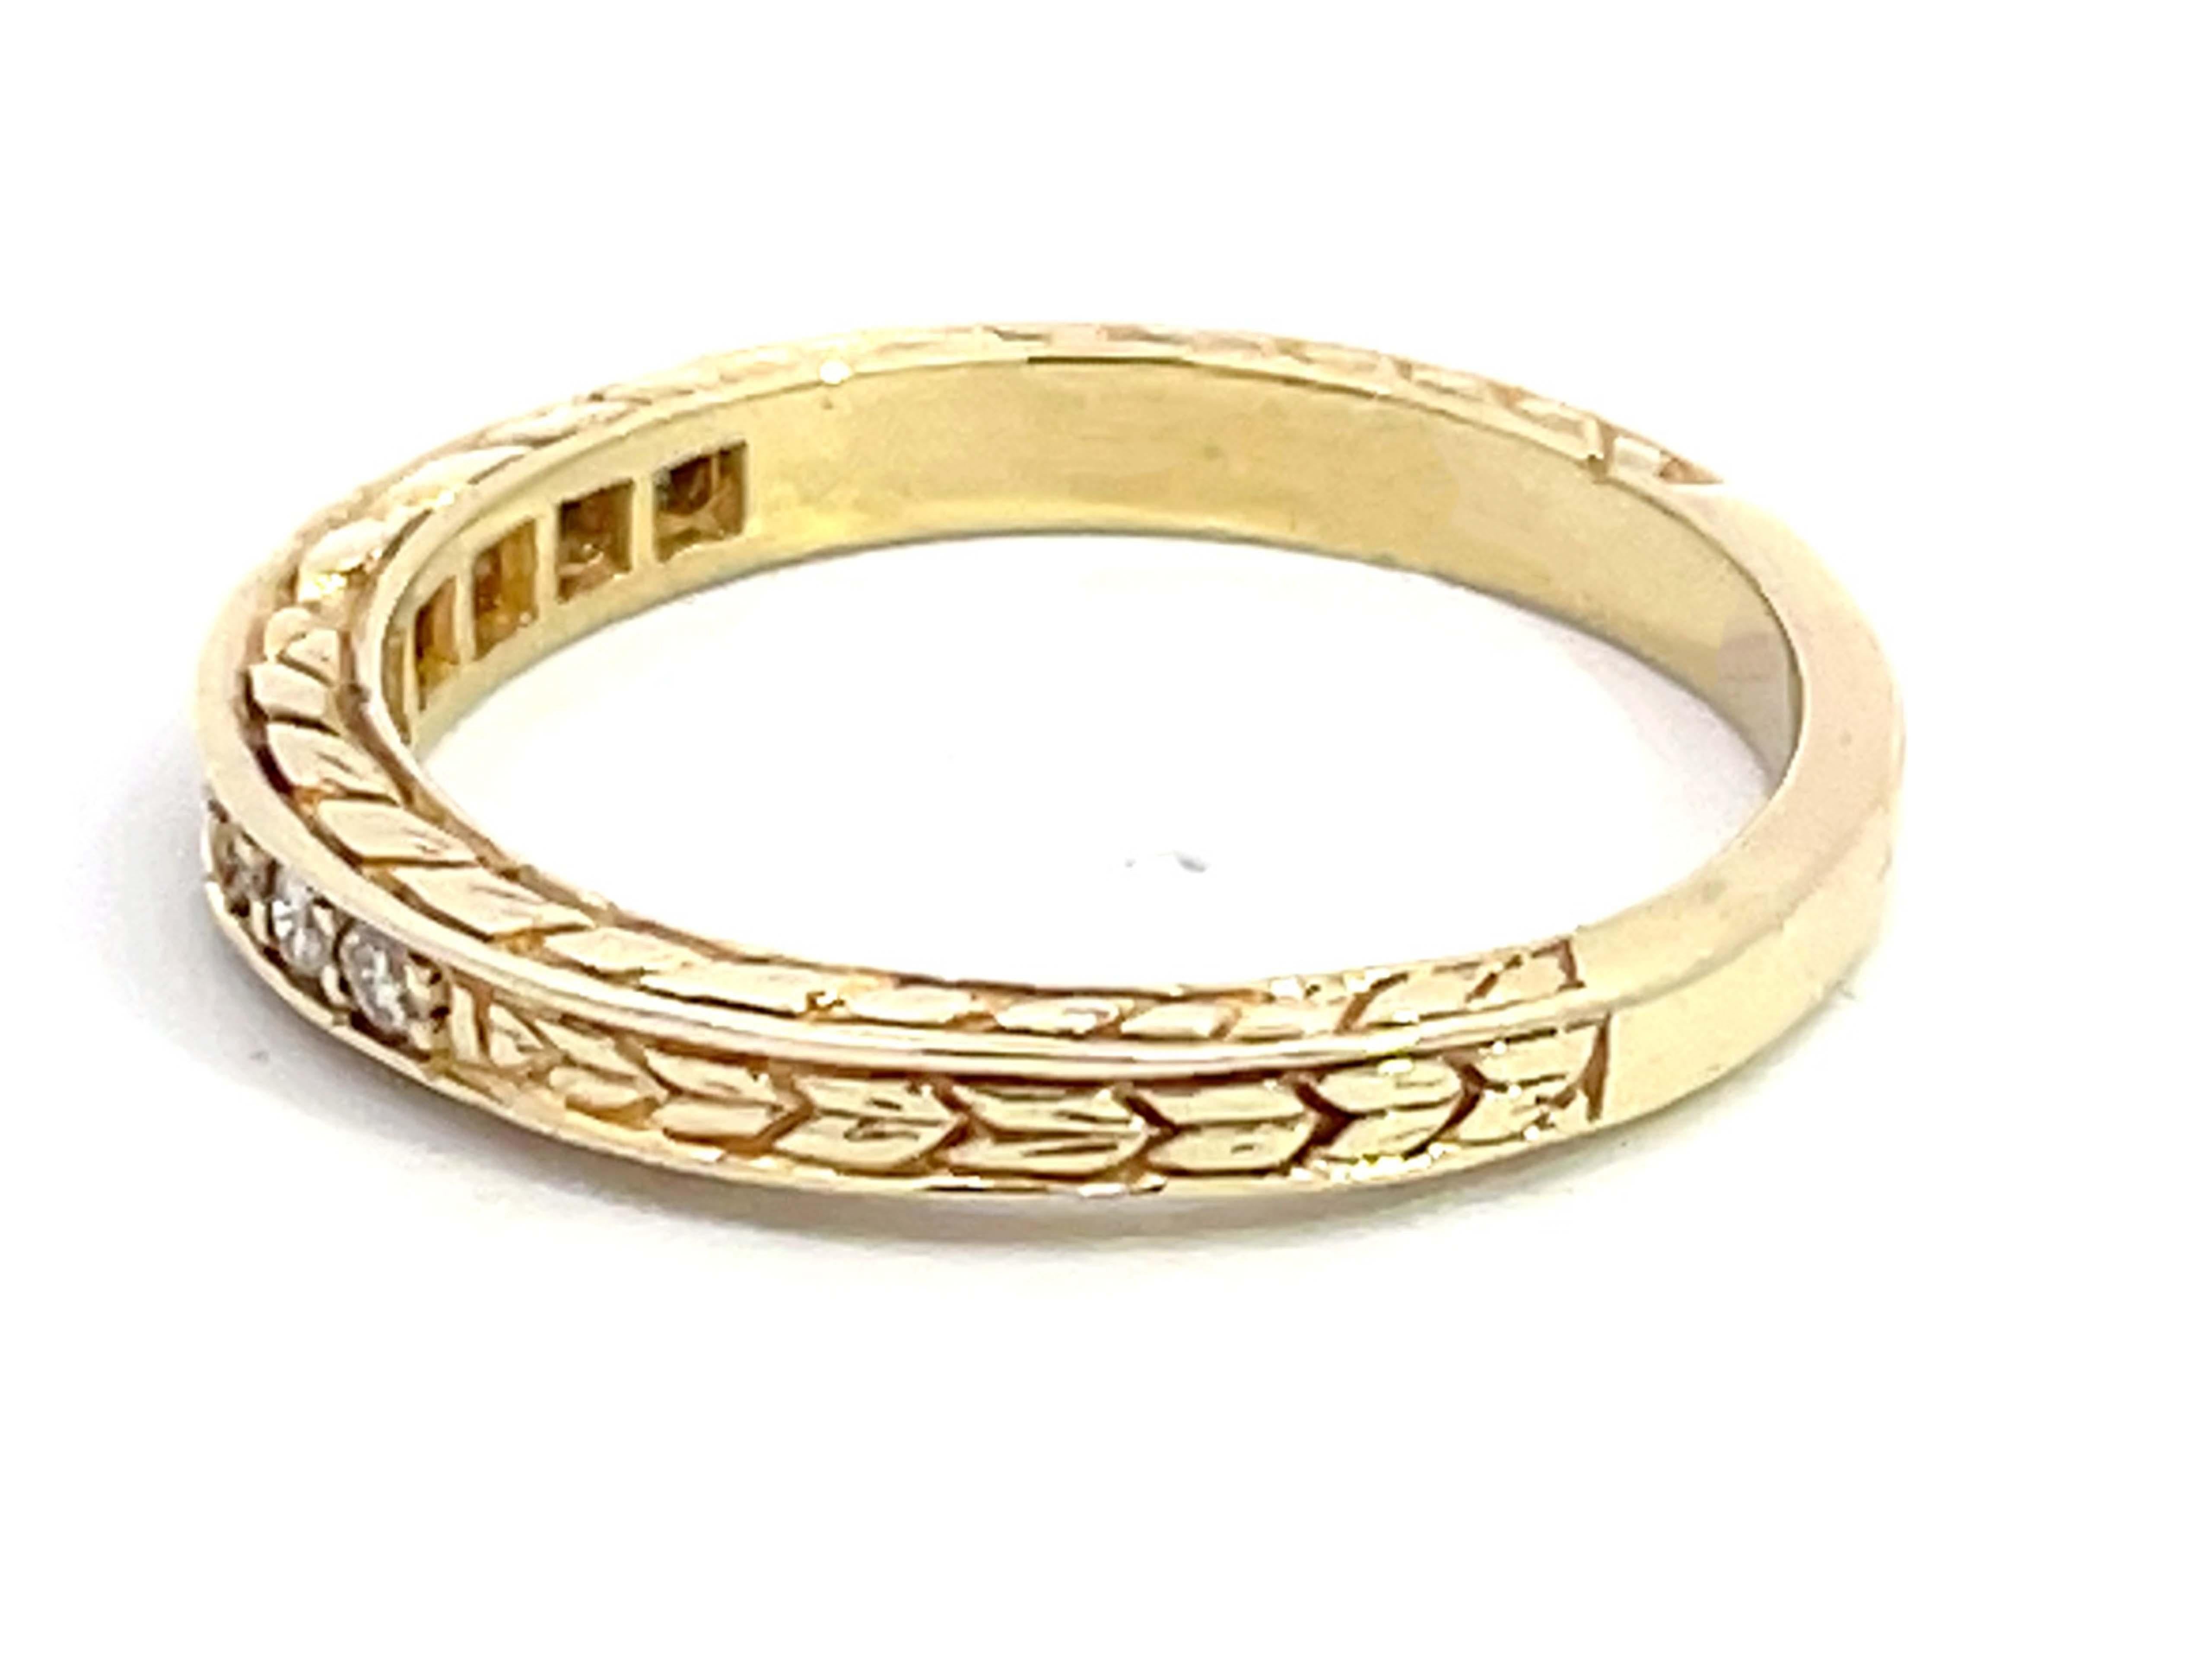 9 Diamond Band Ring in 14k Yellow Gold In Excellent Condition For Sale In Honolulu, HI